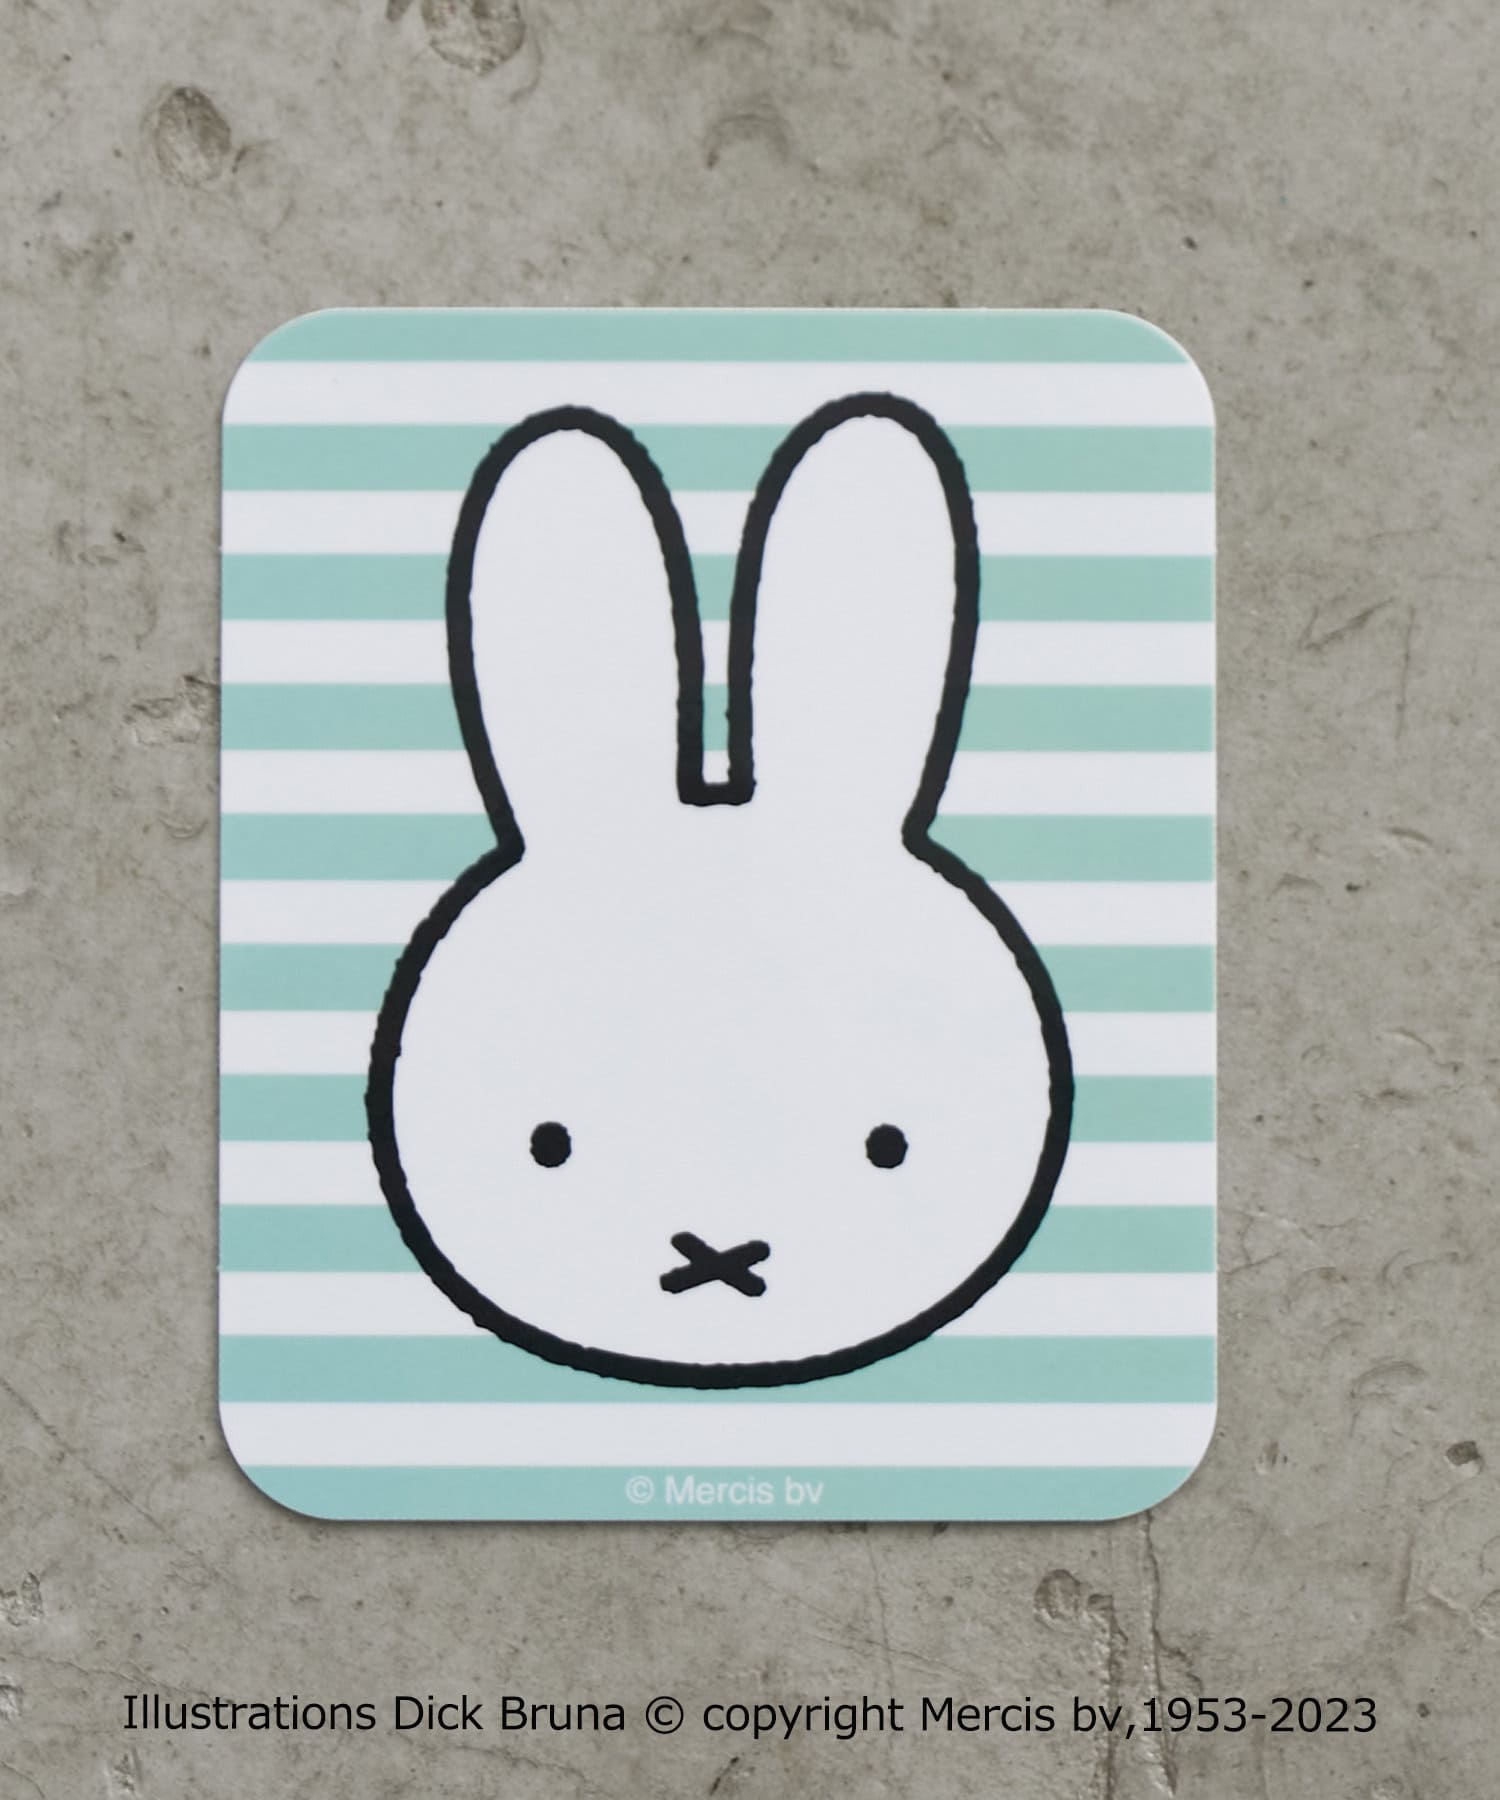 NICE CLAUP OUTLET(ナイスクラップ アウトレット) 《miffy》キャラクターステッカー